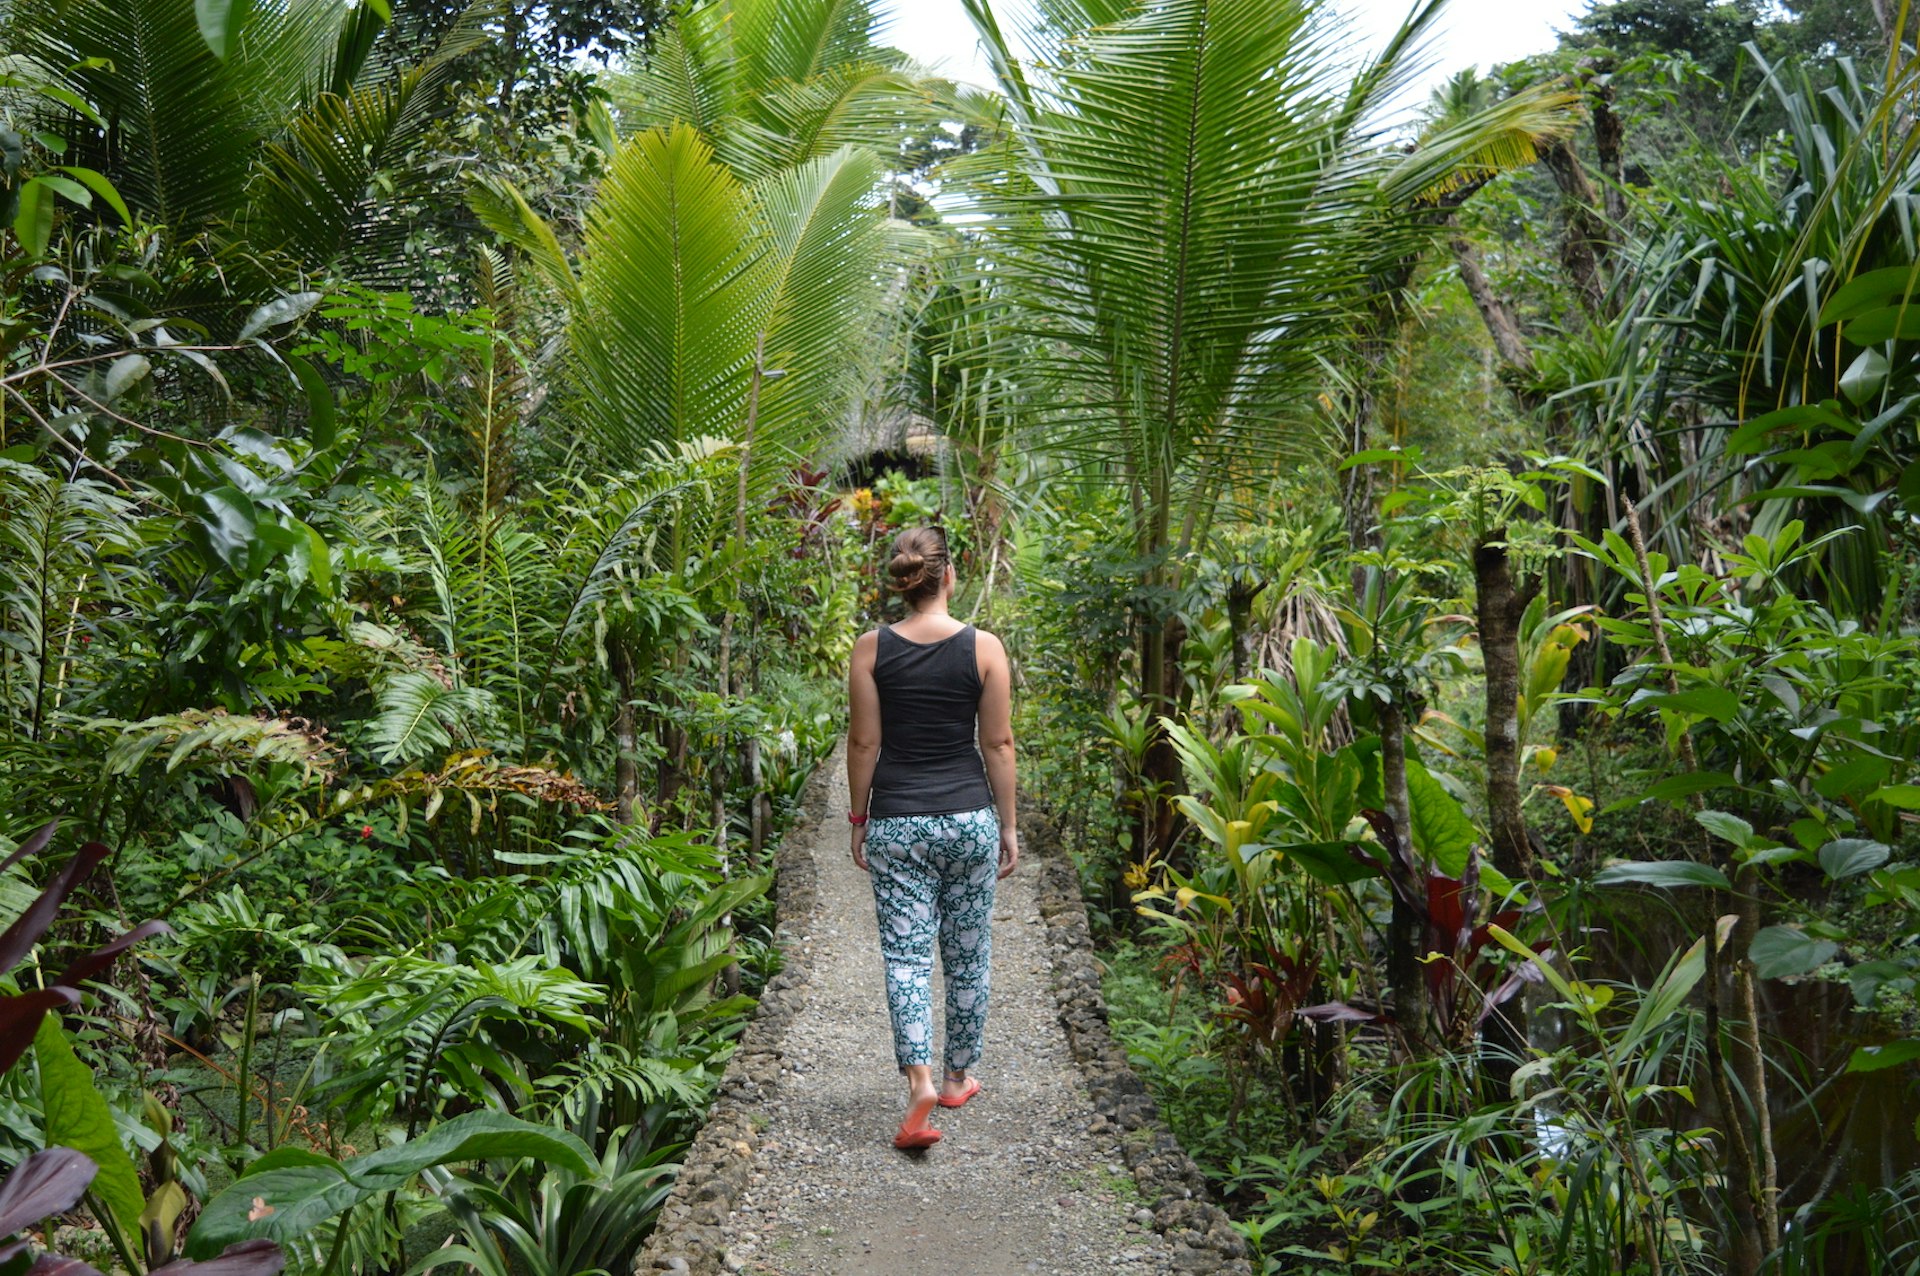 Photo of a woman from behind wearing flip flops, trousers and a tank top as she walks on a dusty path through lush tropical gardens in Guatemala